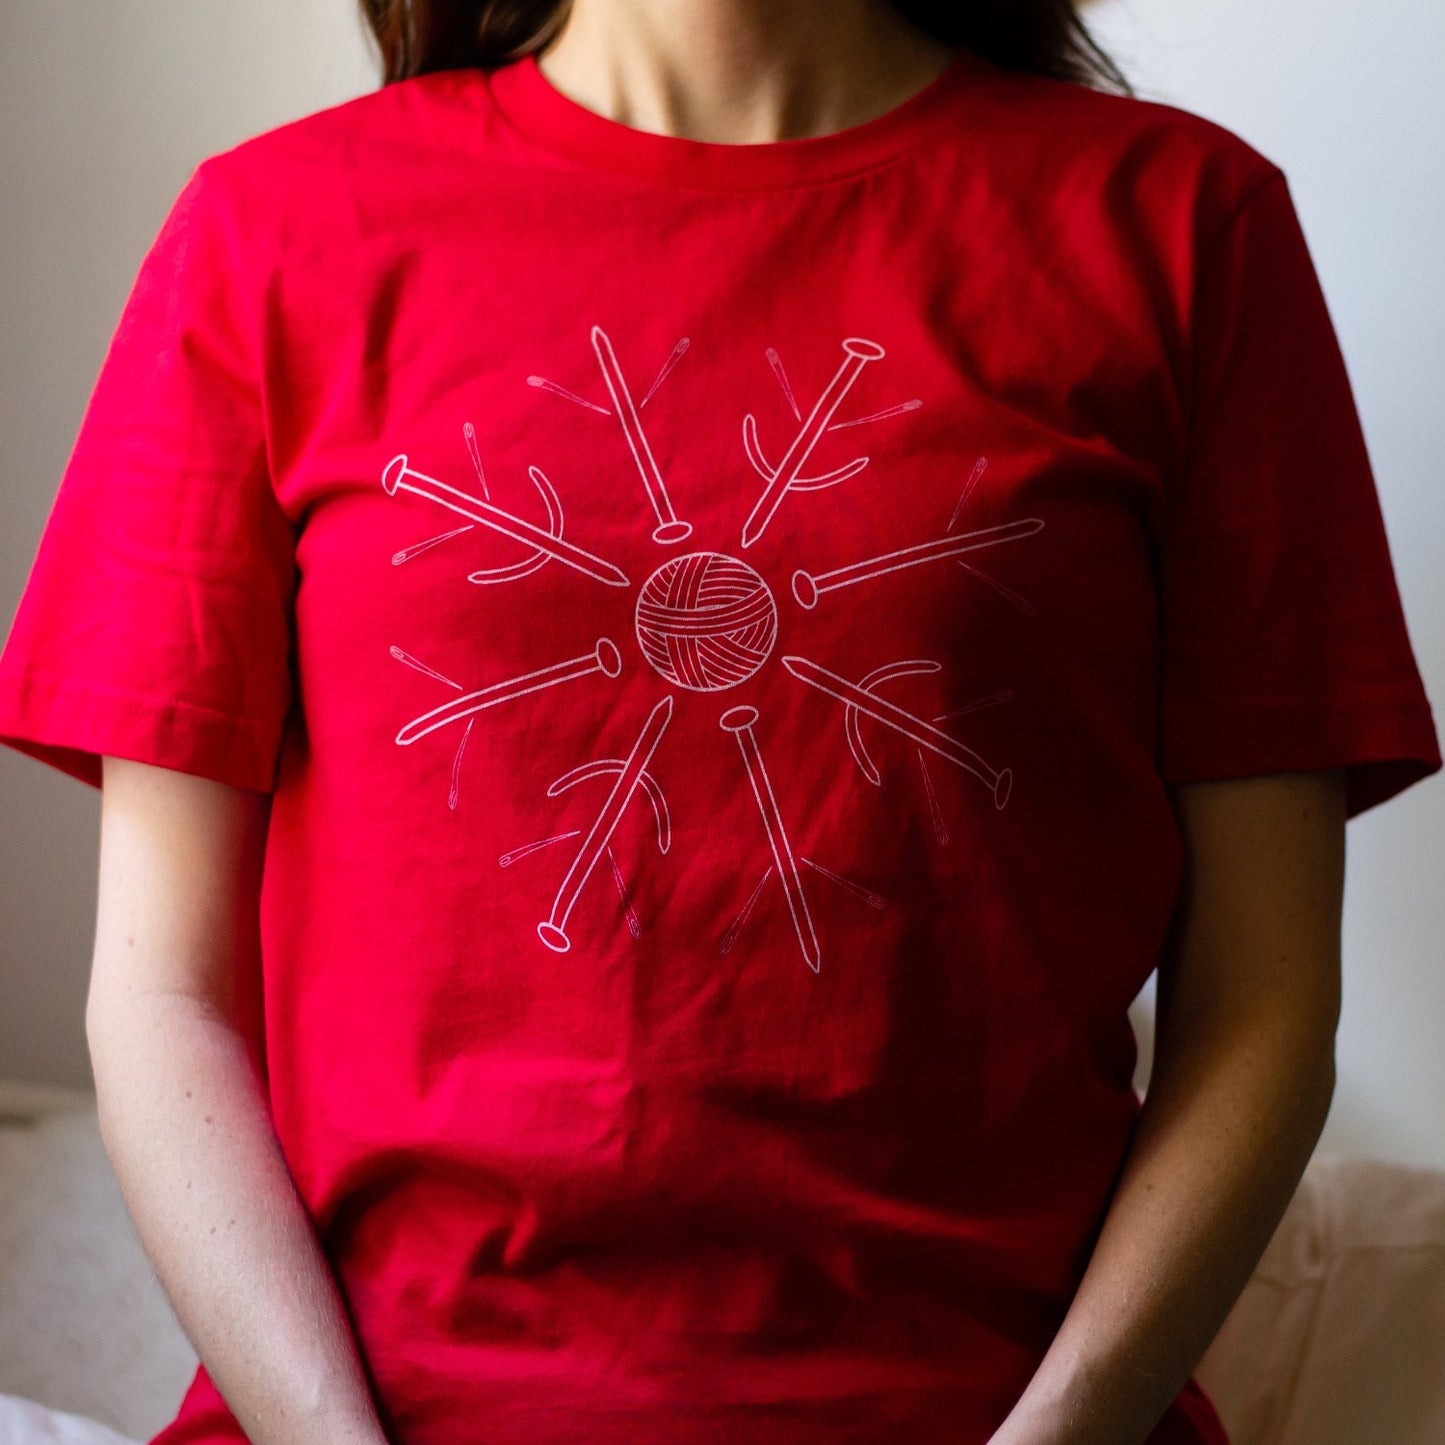 holiday knitting t-shirt for women by adKnits